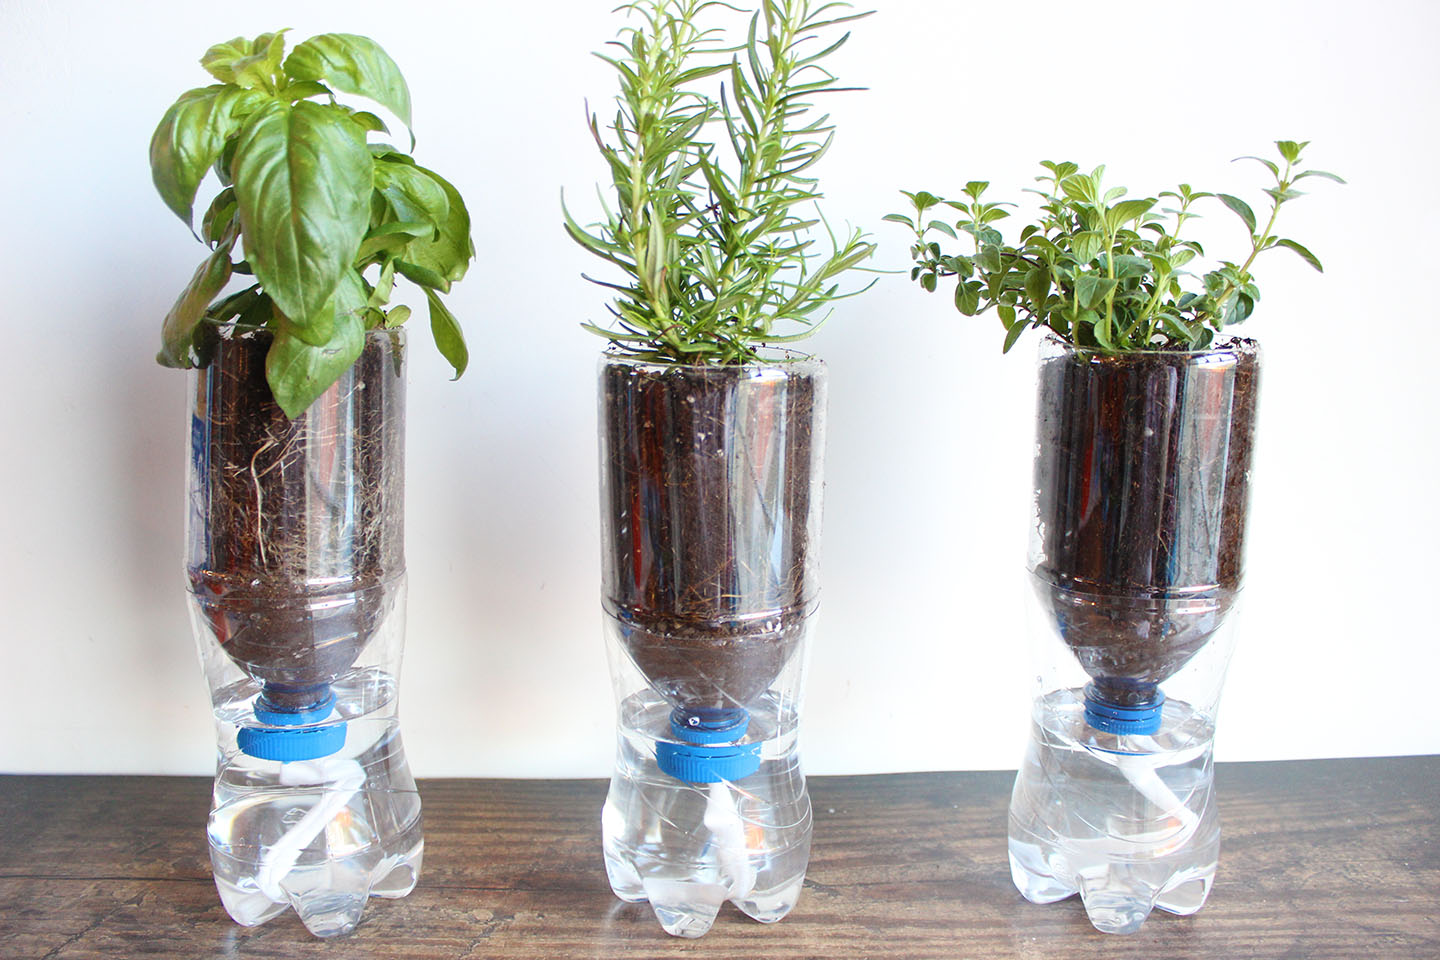 Greenery Unlimited  What are Self Watering Planters and How Do They Work?